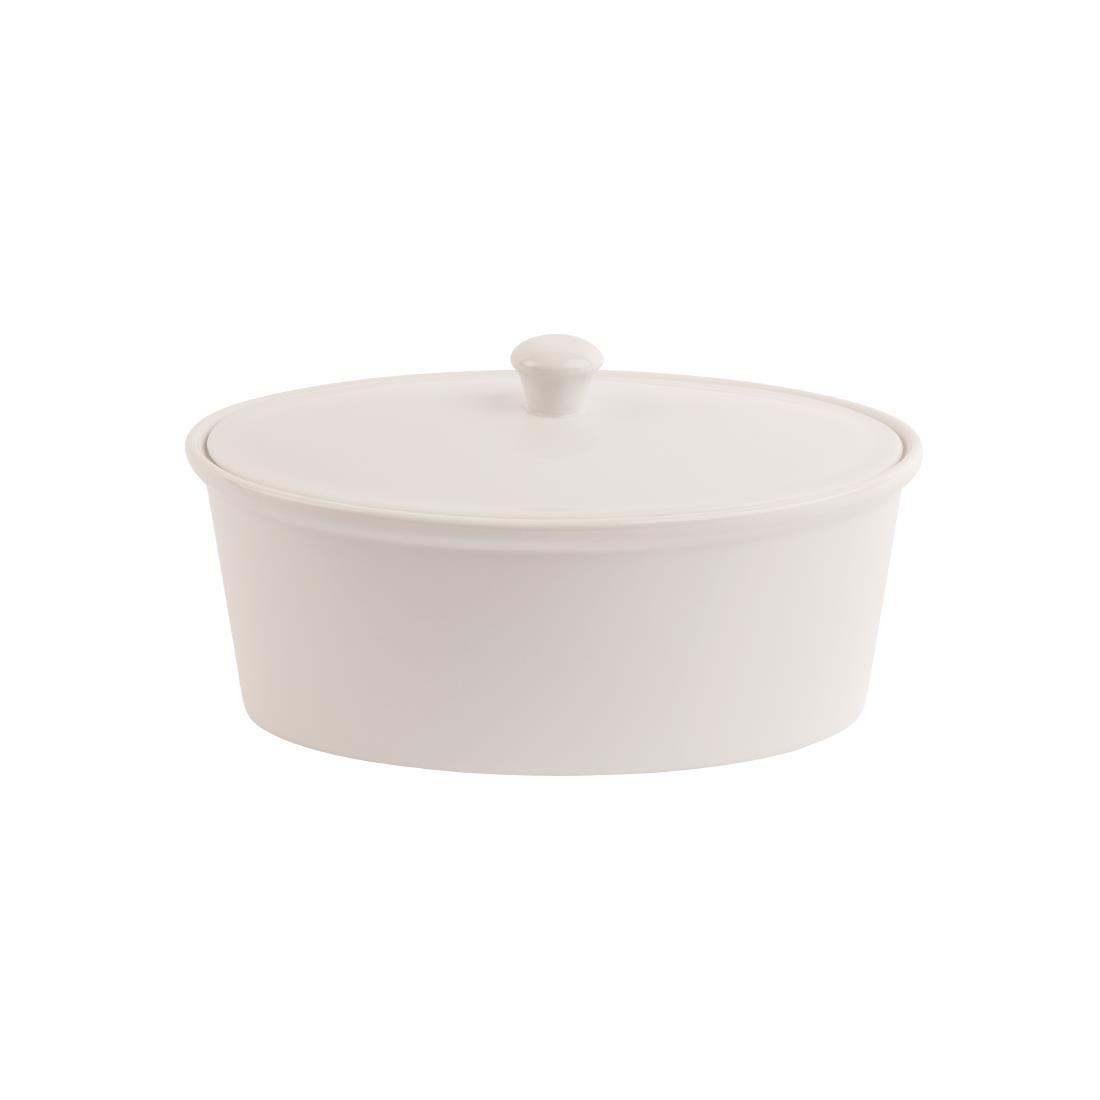 Olympia Whiteware Oval Casserole Dish with Lid 2.2Ltr - CB712  - 4